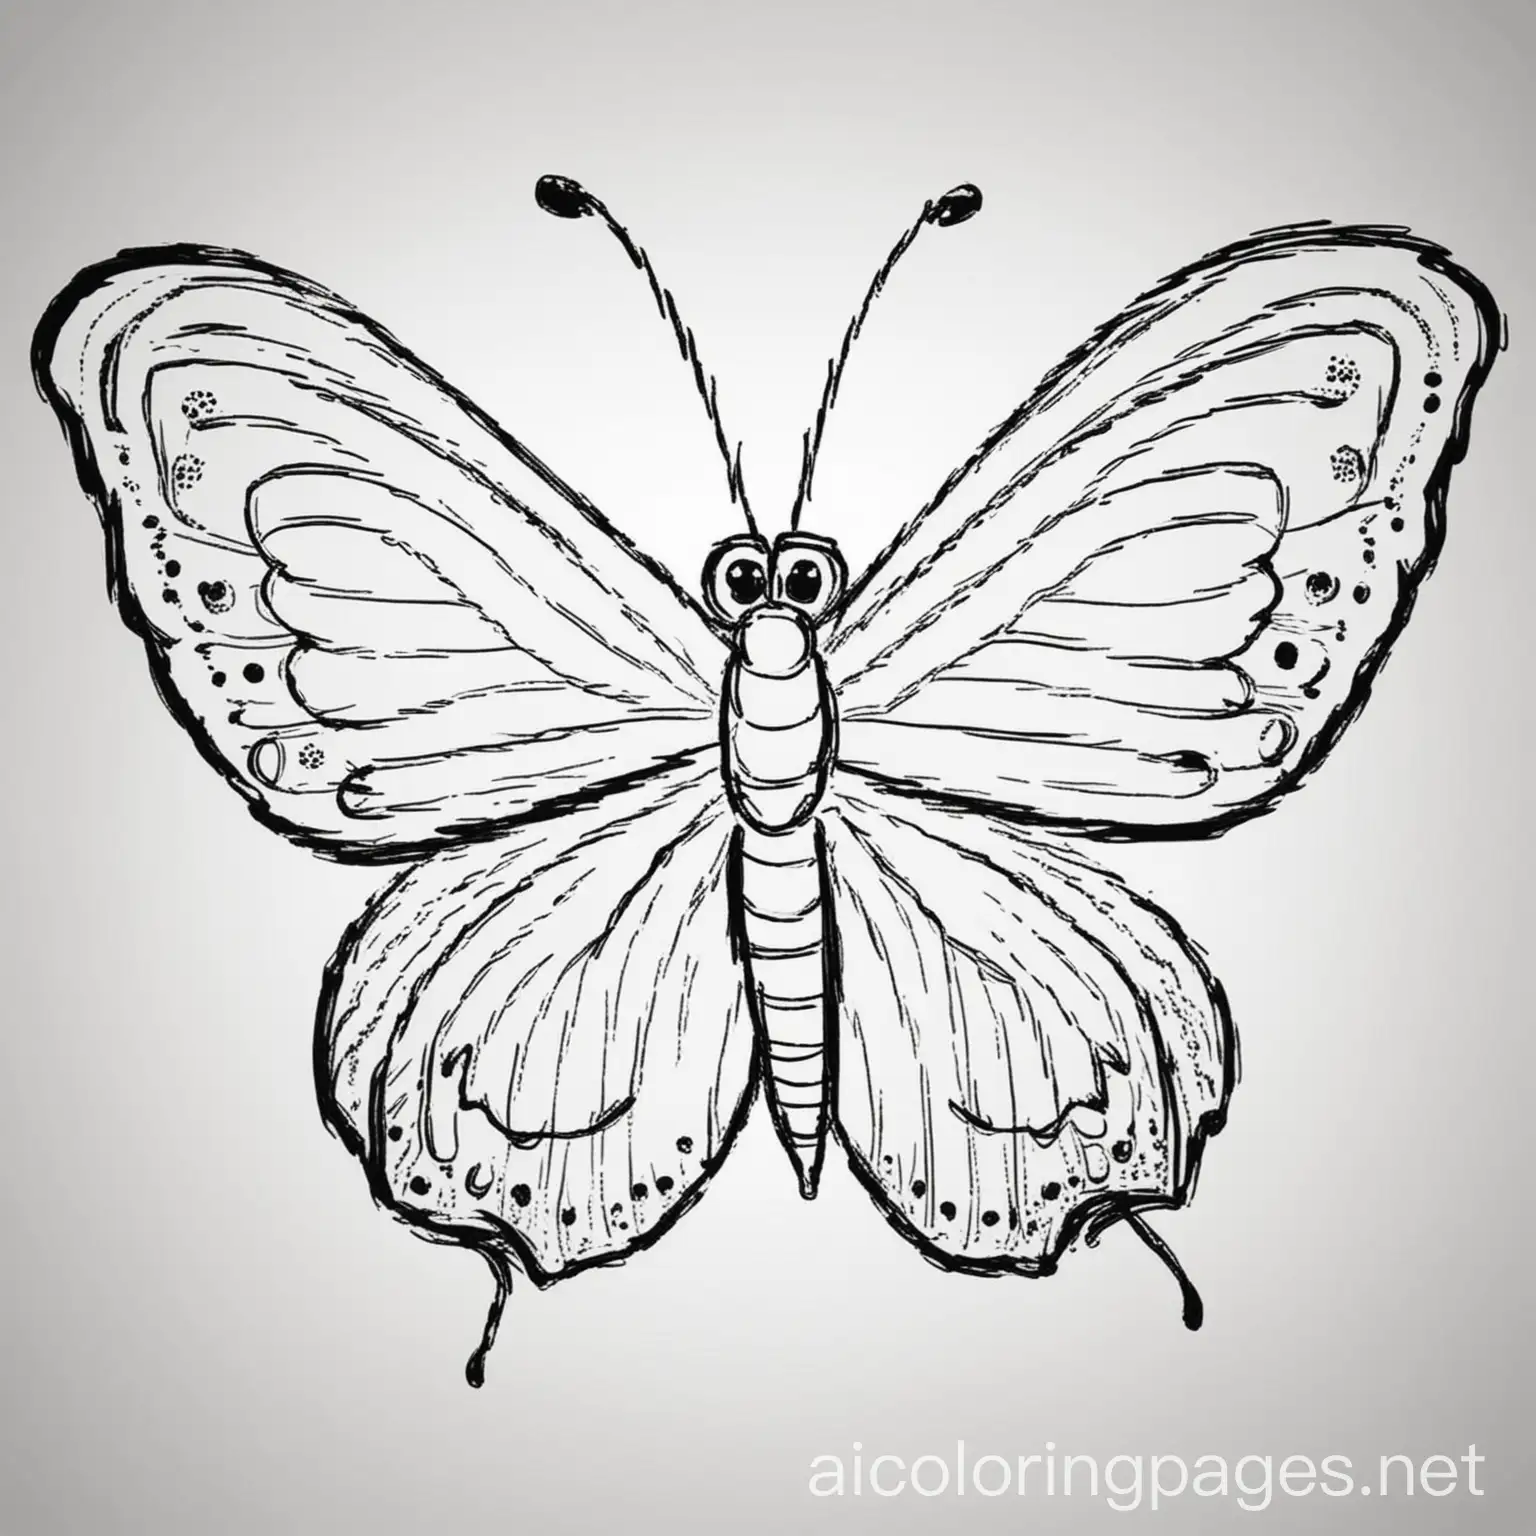 butterfly simple lines and curves for kids colour black and white

, Coloring Page, black and white, line art, white background, Simplicity, Ample White Space. The background of the coloring page is plain white to make it easy for young children to color within the lines. The outlines of all the subjects are easy to distinguish, making it simple for kids to color without too much difficulty